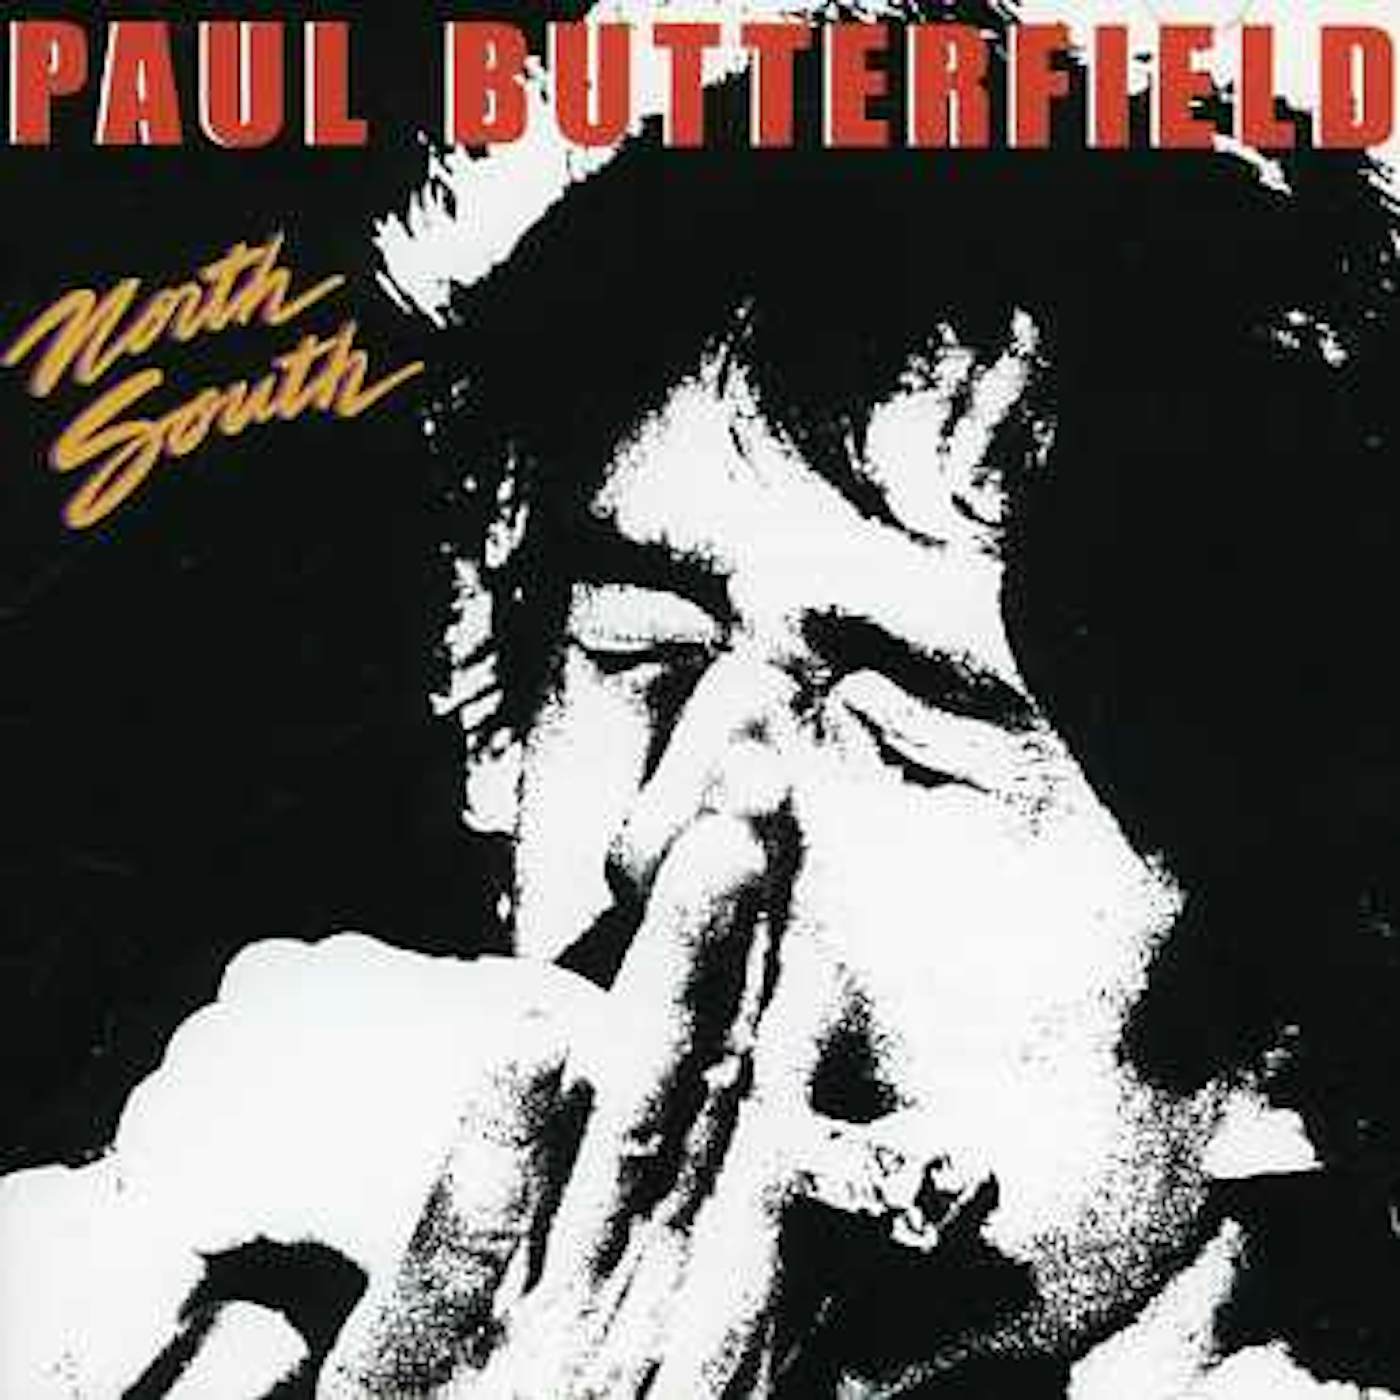 Paul Butterfield NORTH SOUTH CD